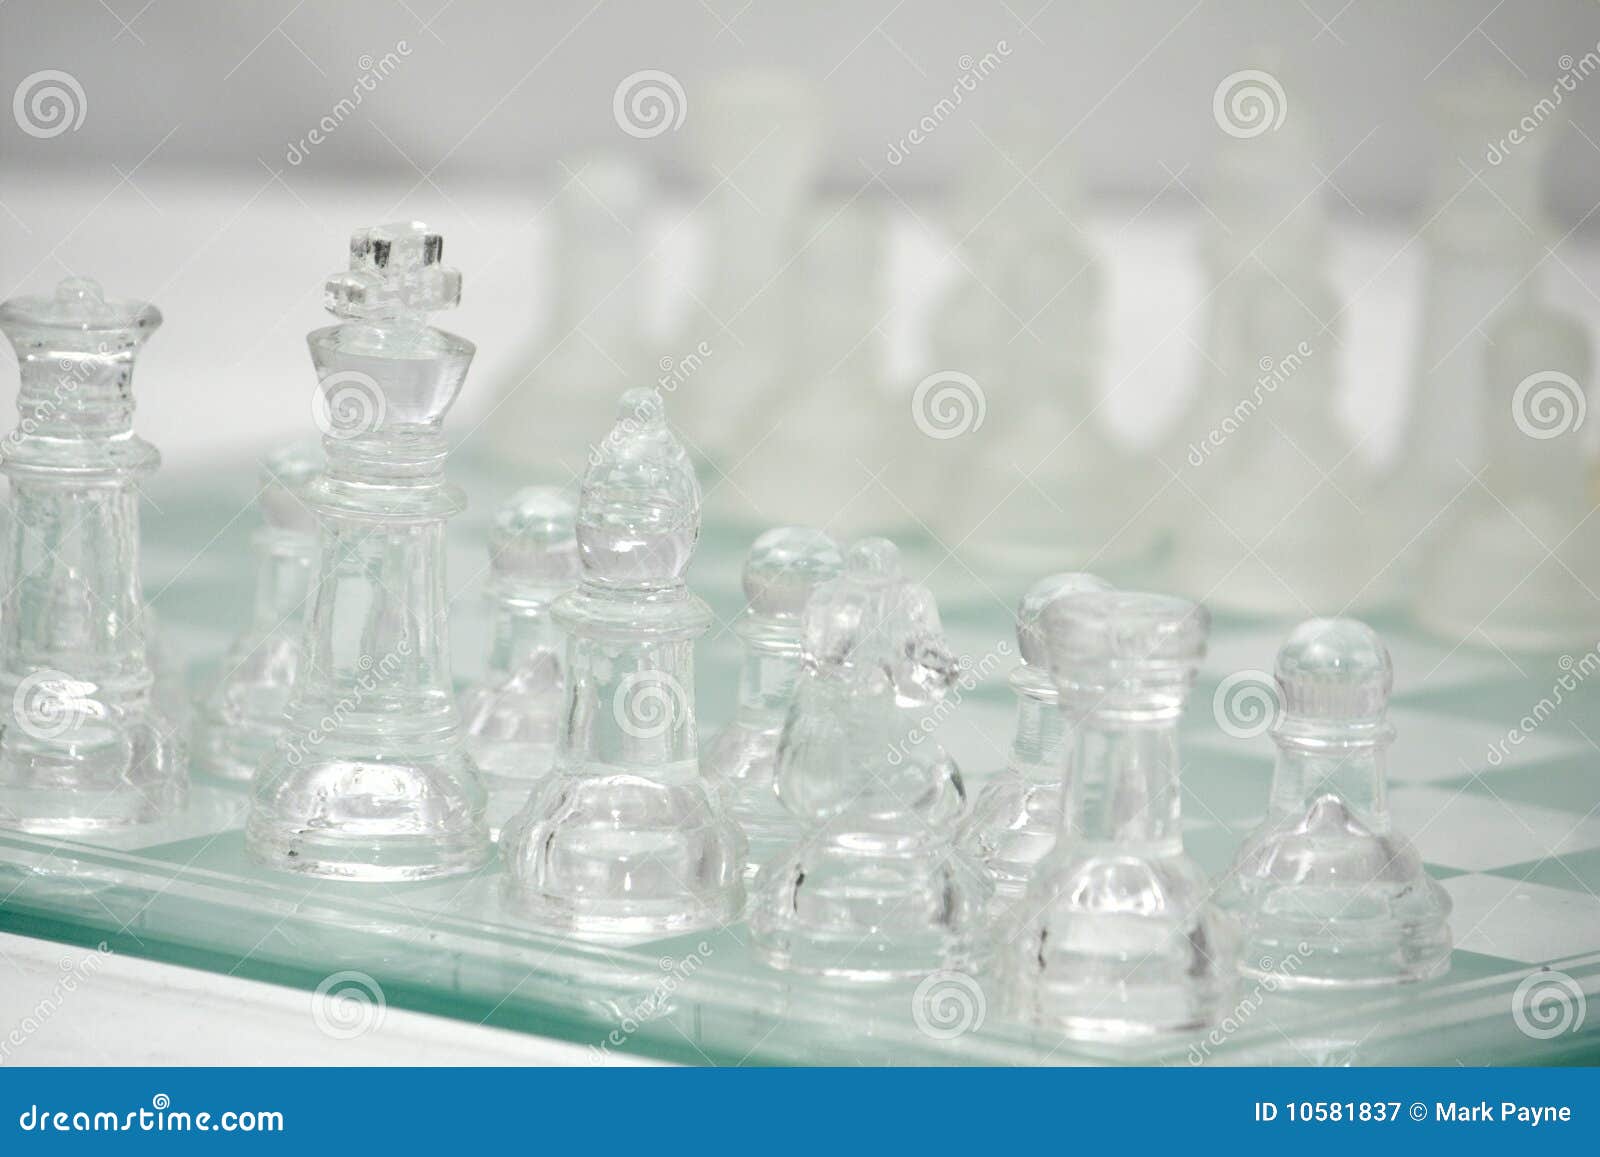 Royalty Free Stock Photography: Glass Chess board with Clear and 